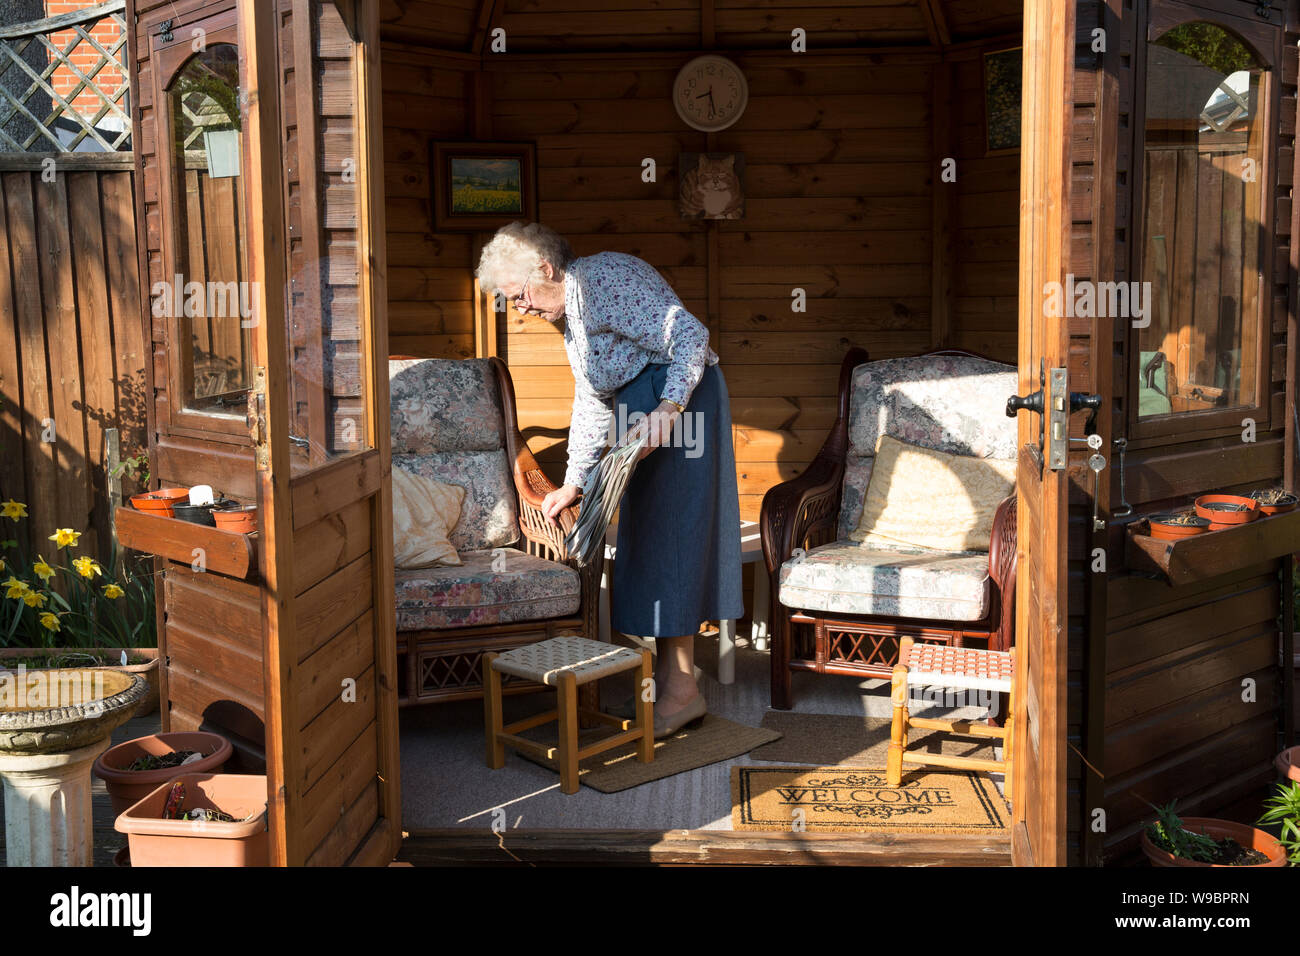 Elderly lady outside in her garden summerhouse at a residential home, southwest England, United Kingdom Stock Photo